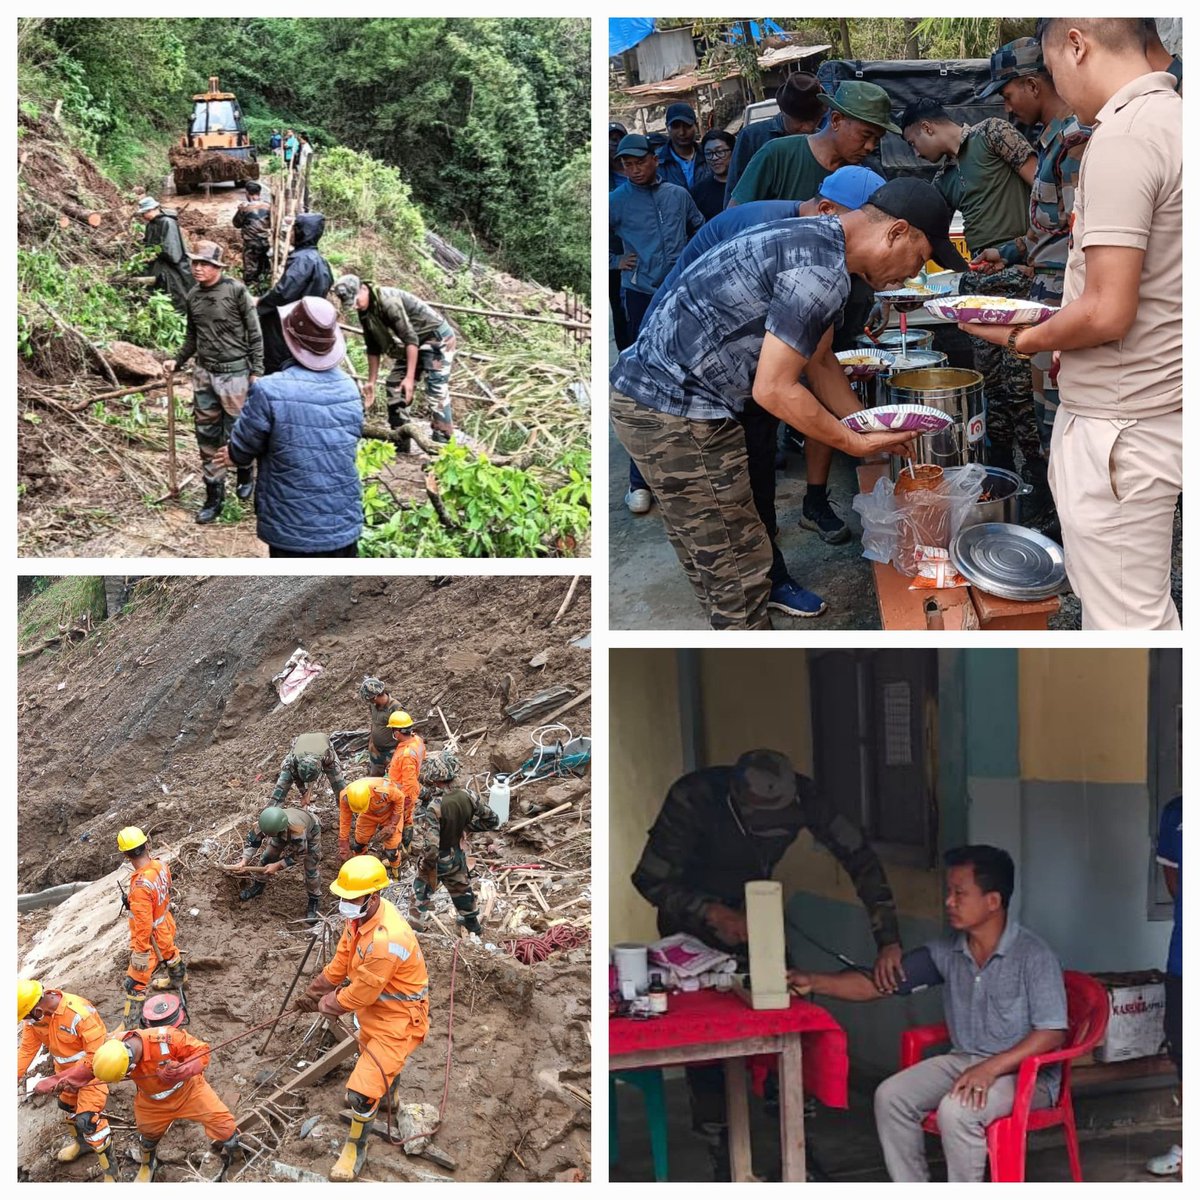 #Cyclone_Remal
Units of #AssamRifles under #SpearCorps, #IndianArmy, restored road connectivity to Zion-Lodhi-Haflong villages in #Assam and provided medical aid to stranded civilians. 
#AssamRifles also carried out relief and rescue operations, provisioned food, water and